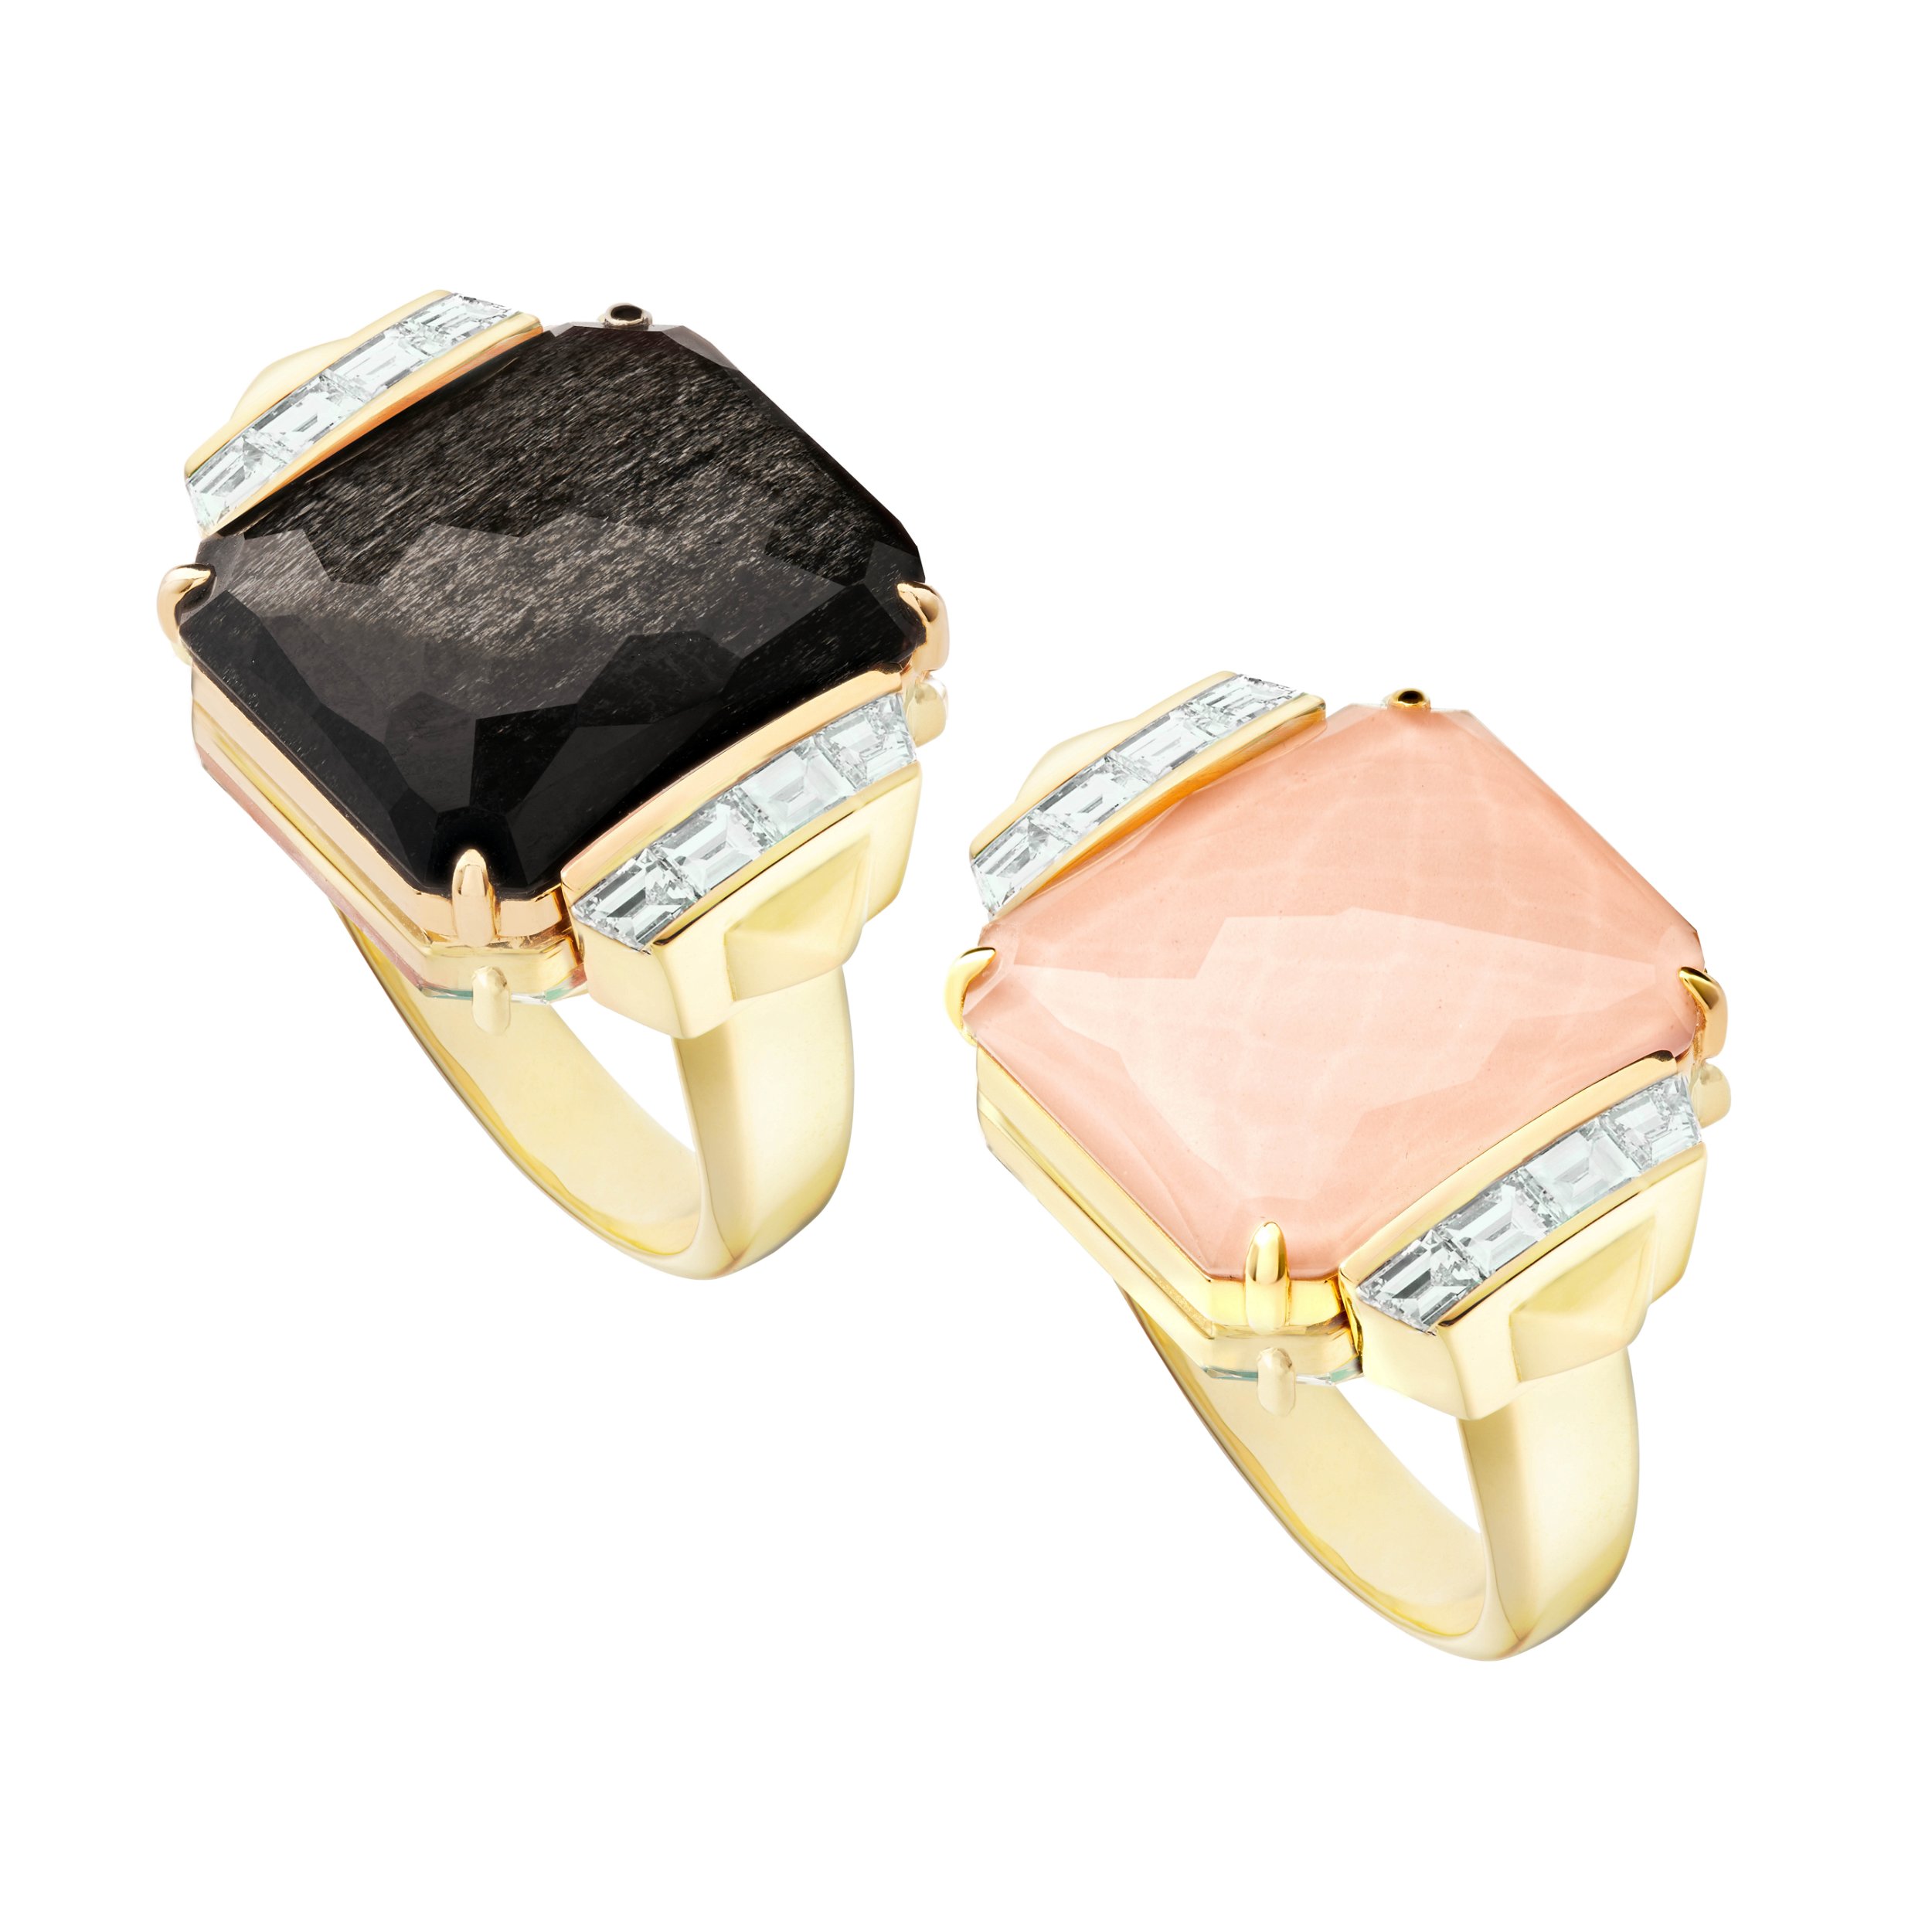 CH2 Tablet Twister Wide Ring with Silver Obsidian, Peach Quartz and White Diamonds in 18kt Yellow Gold - Size 7